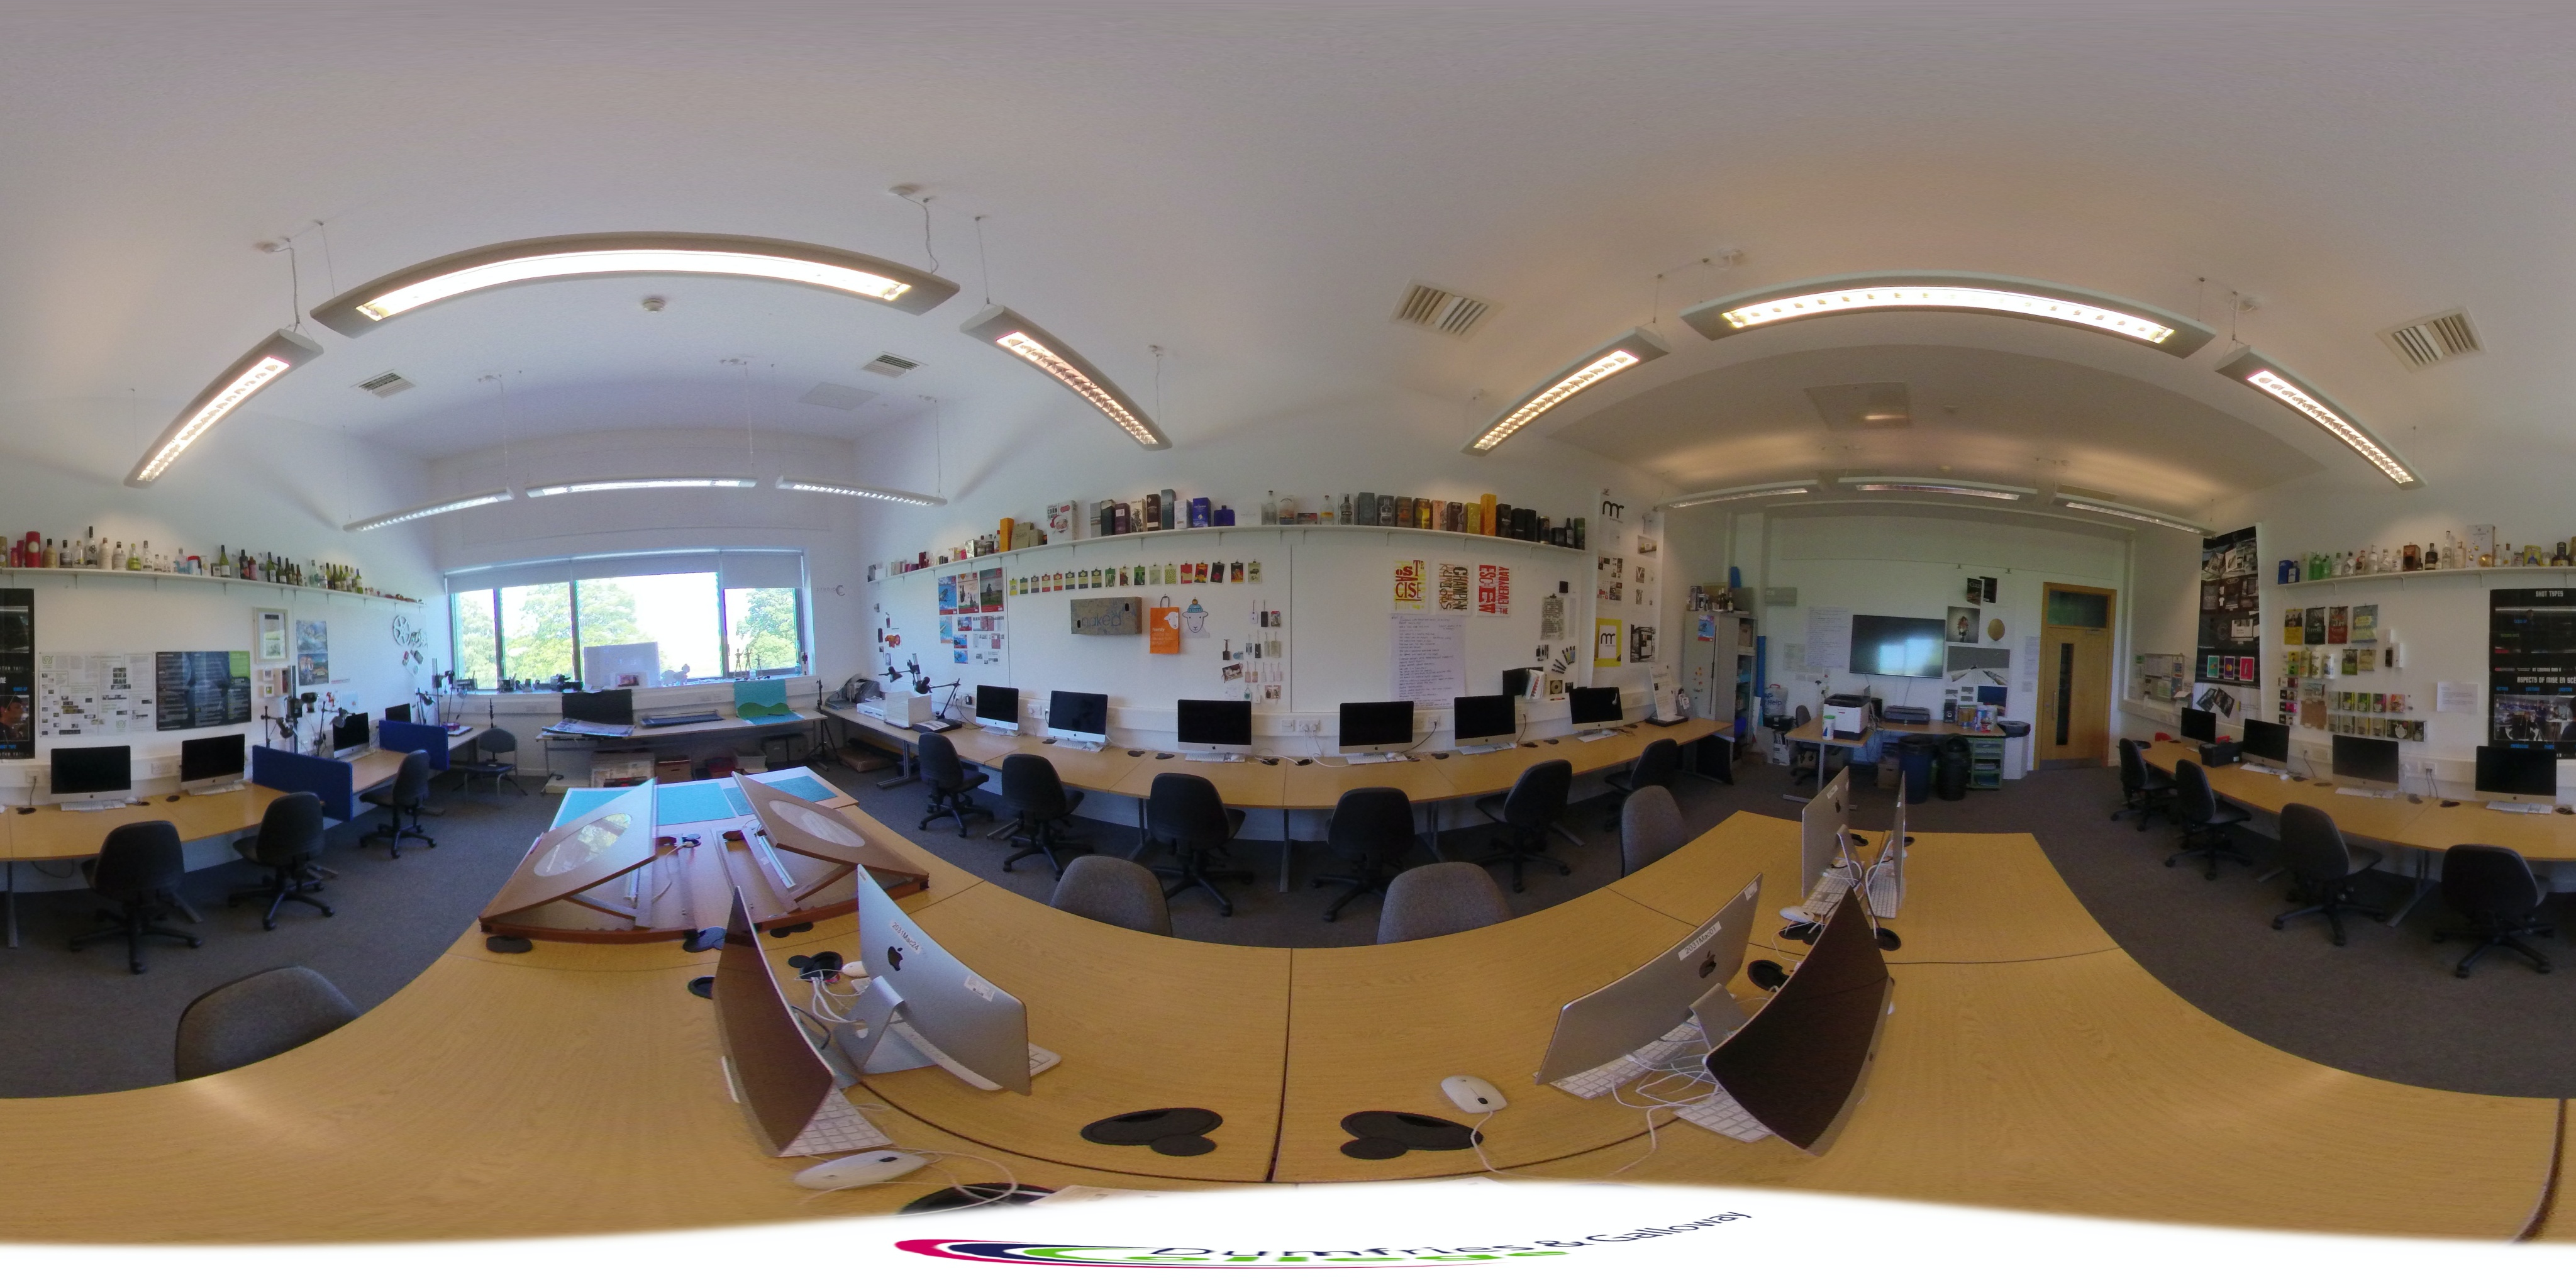 360 Photo of One of the Mac rooms